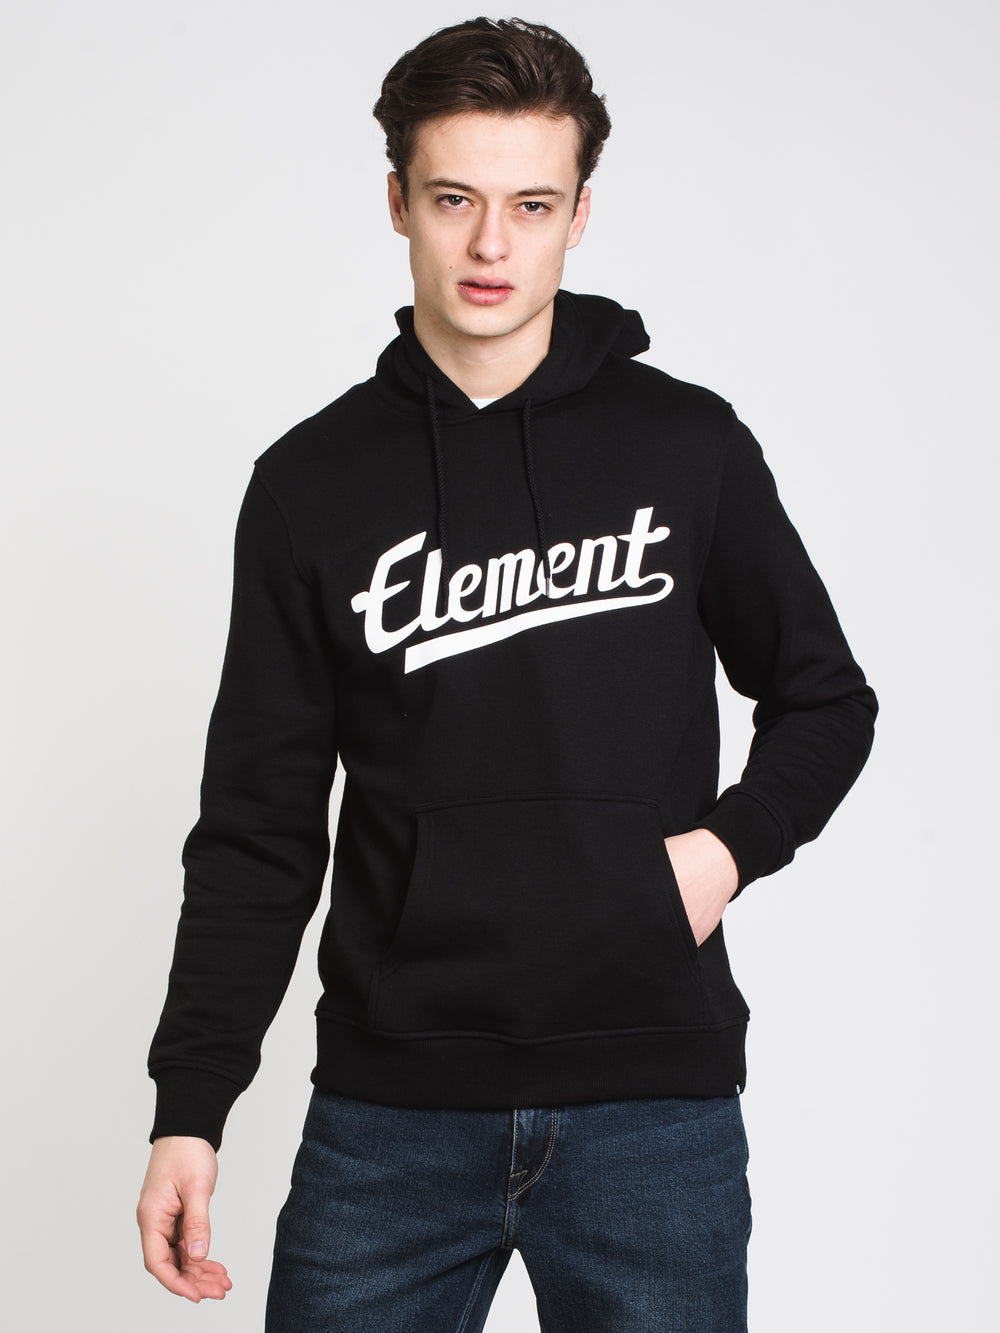 MENS LEAGUE PULLOVER HOODIE - BLACK - CLEARANCE